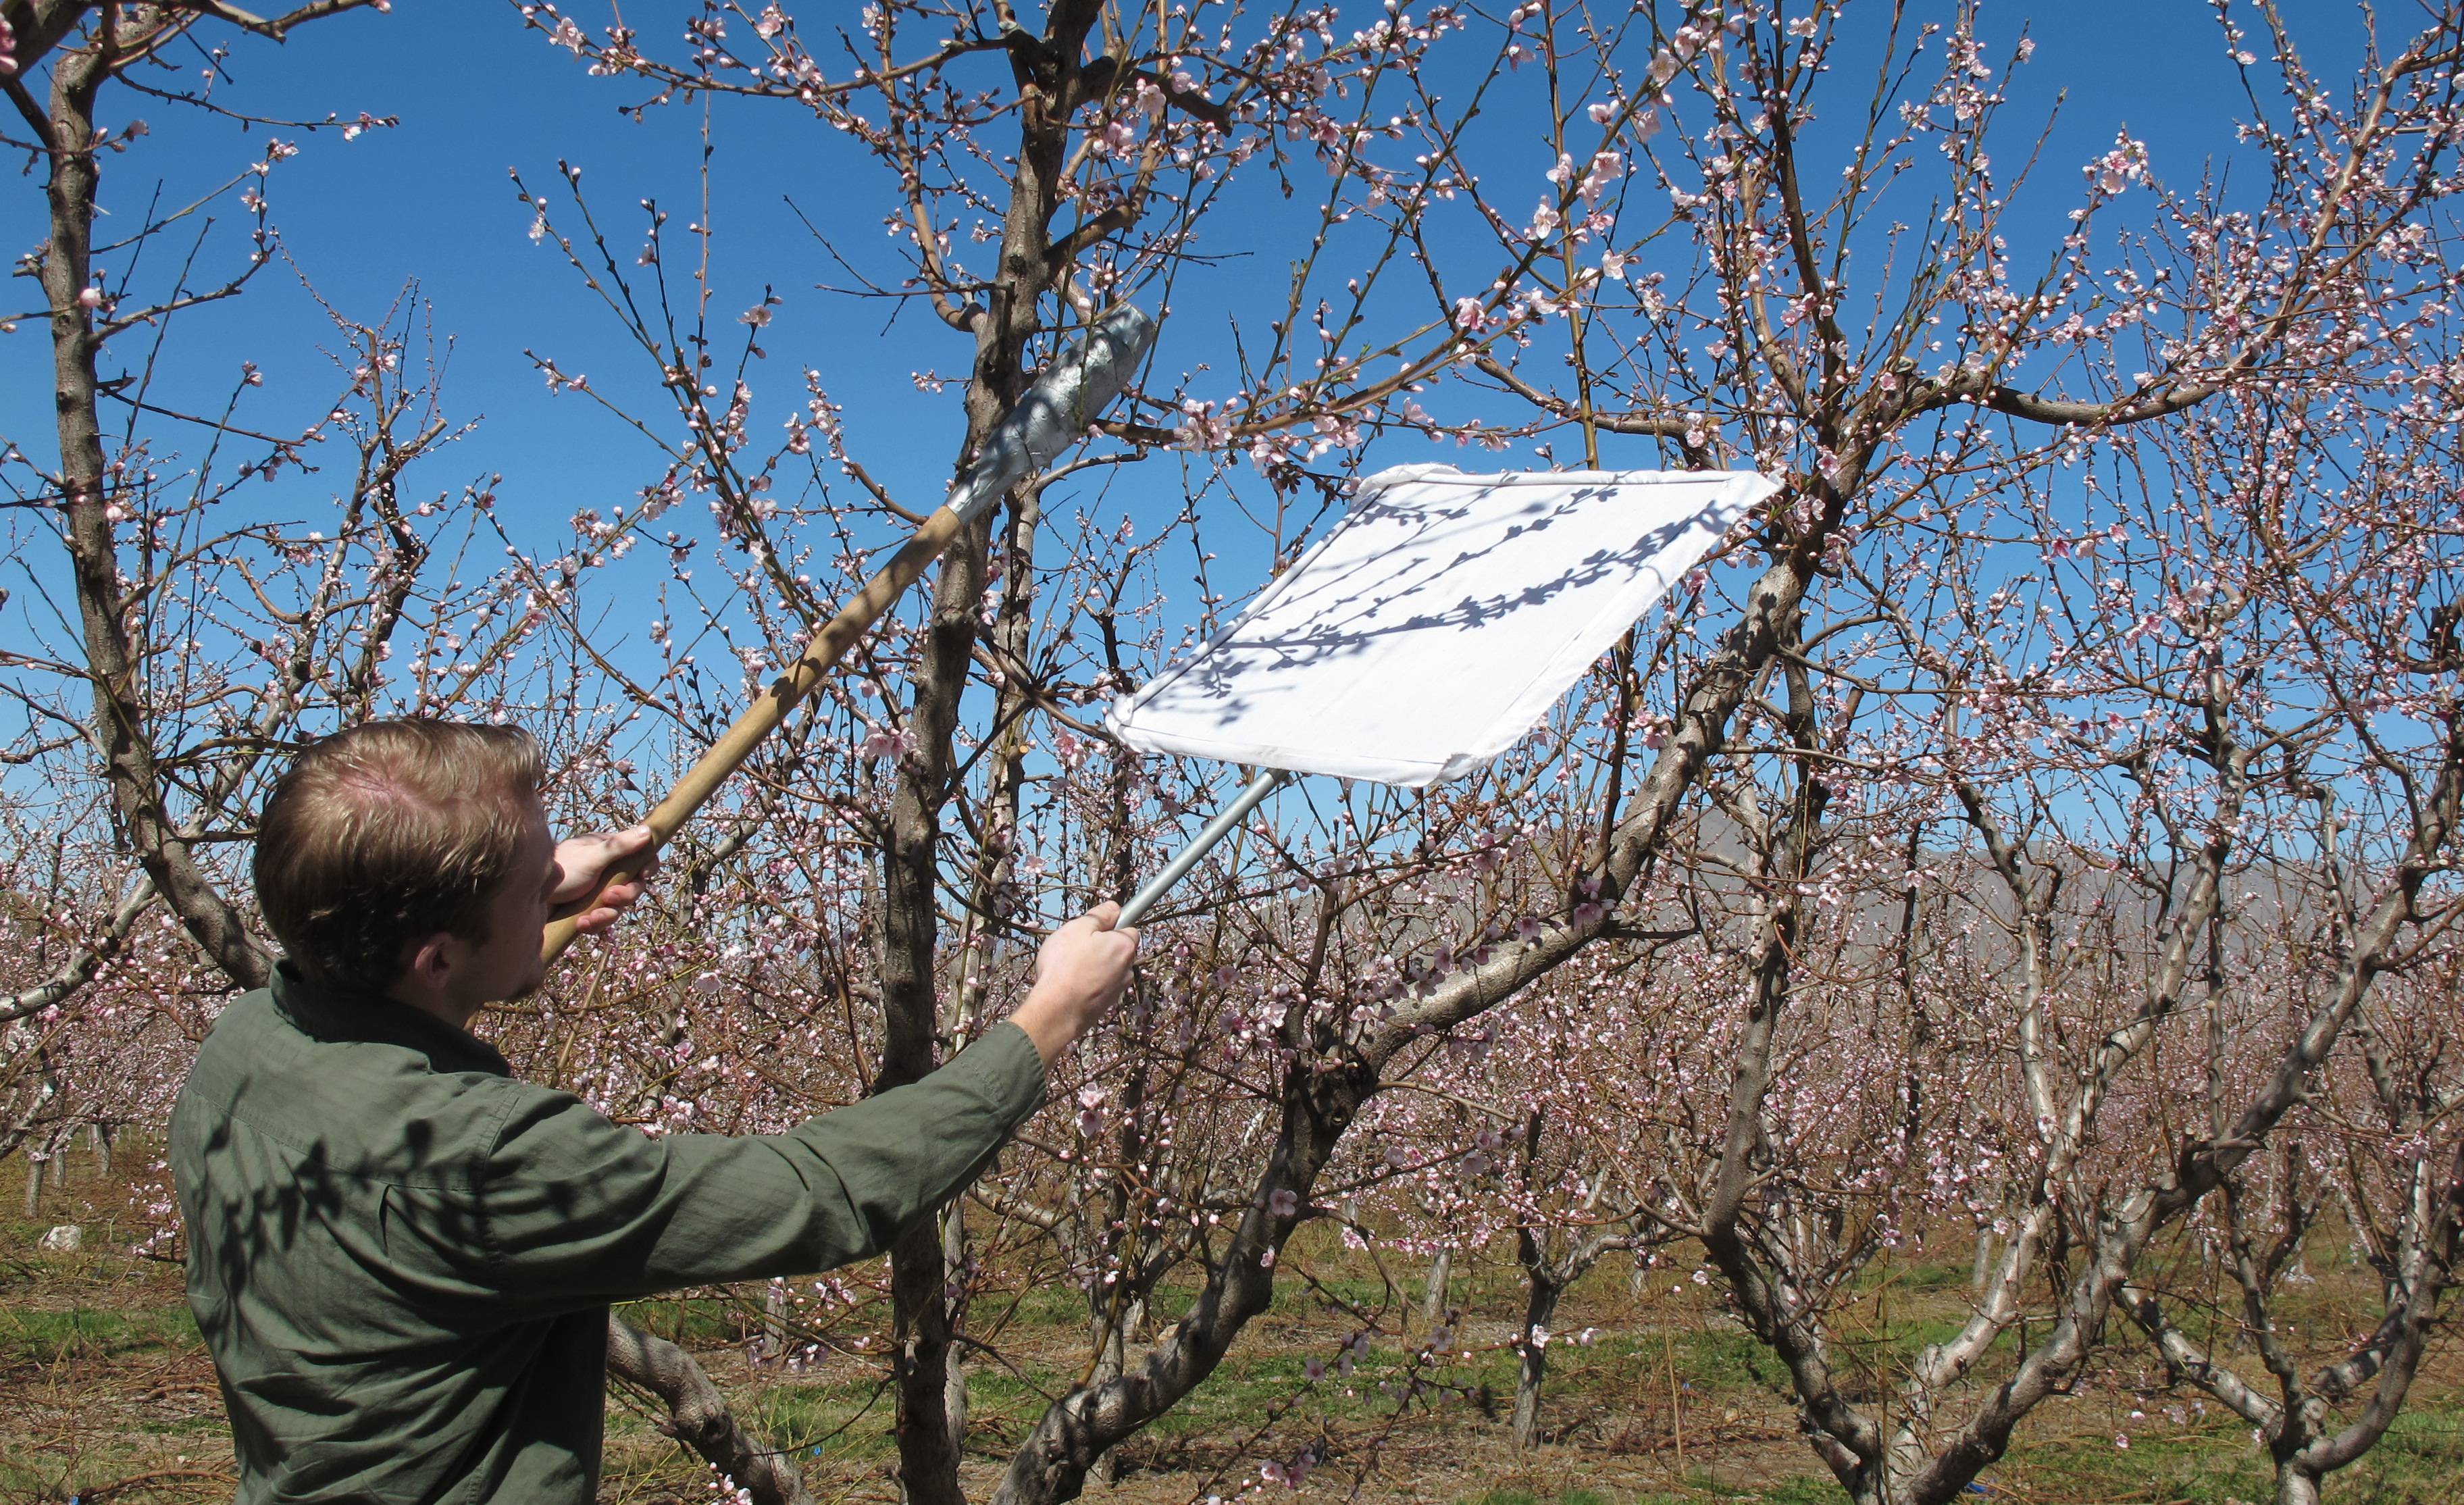 Fig. 9. Sampling for plum curculio using a beating tray and stick. Utah State University Extension.